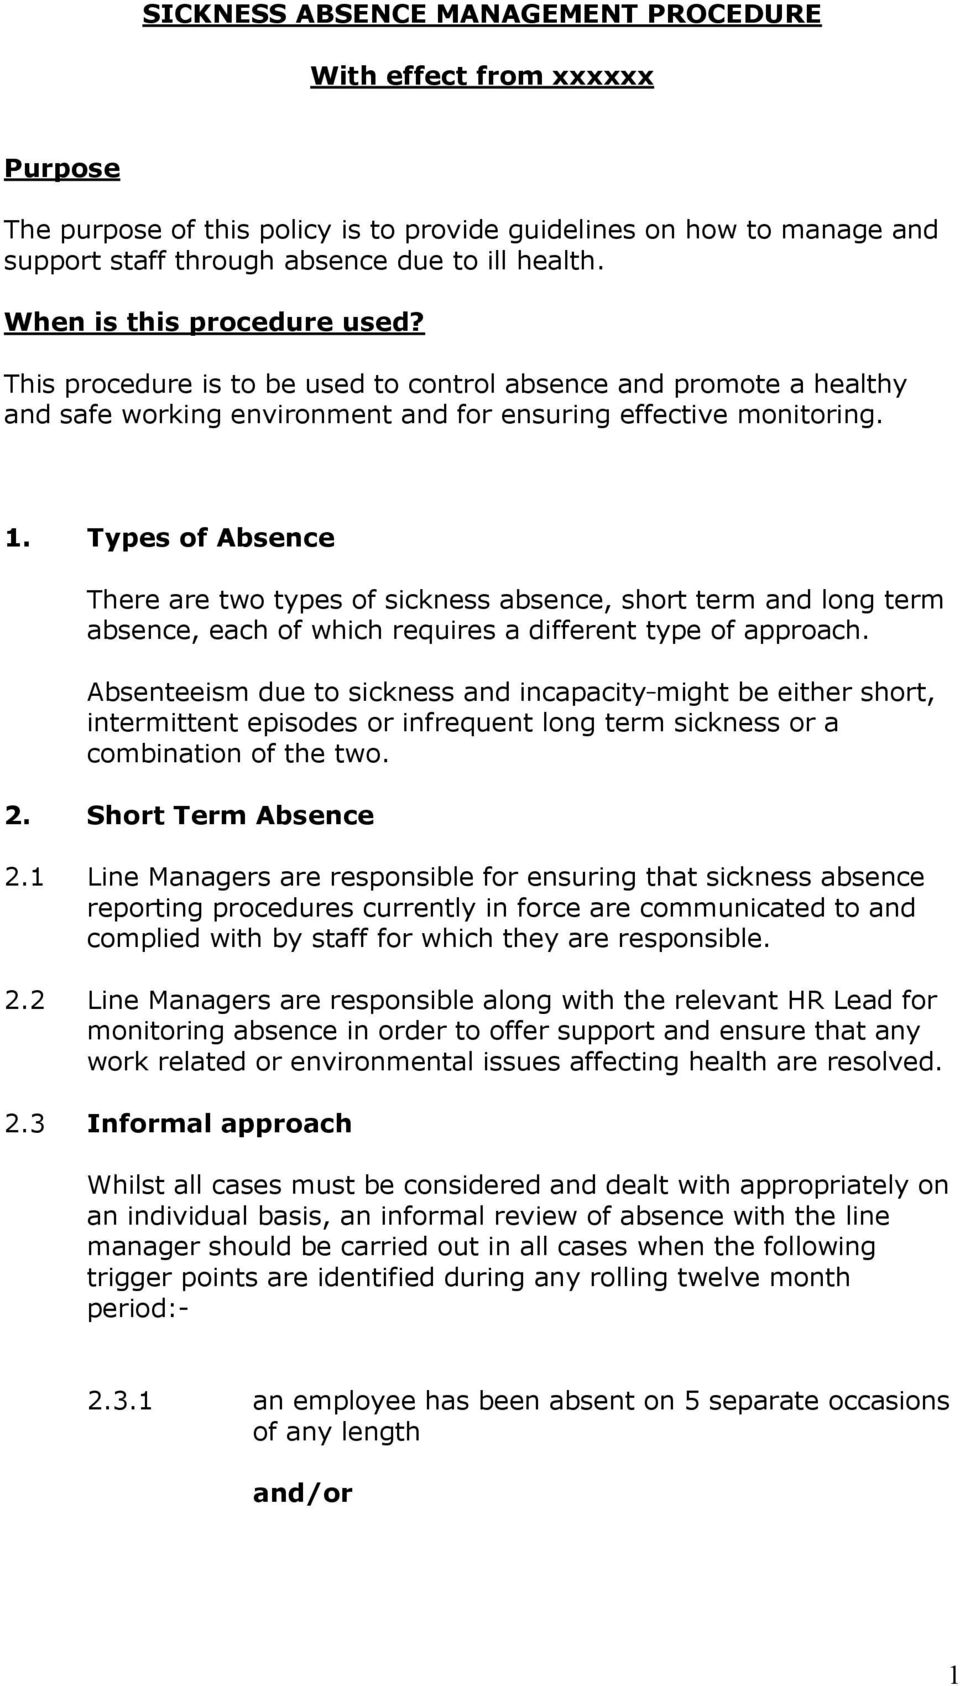 Types of Absence There are two types of sickness absence, short term and long term absence, each of which requires a different type of approach.